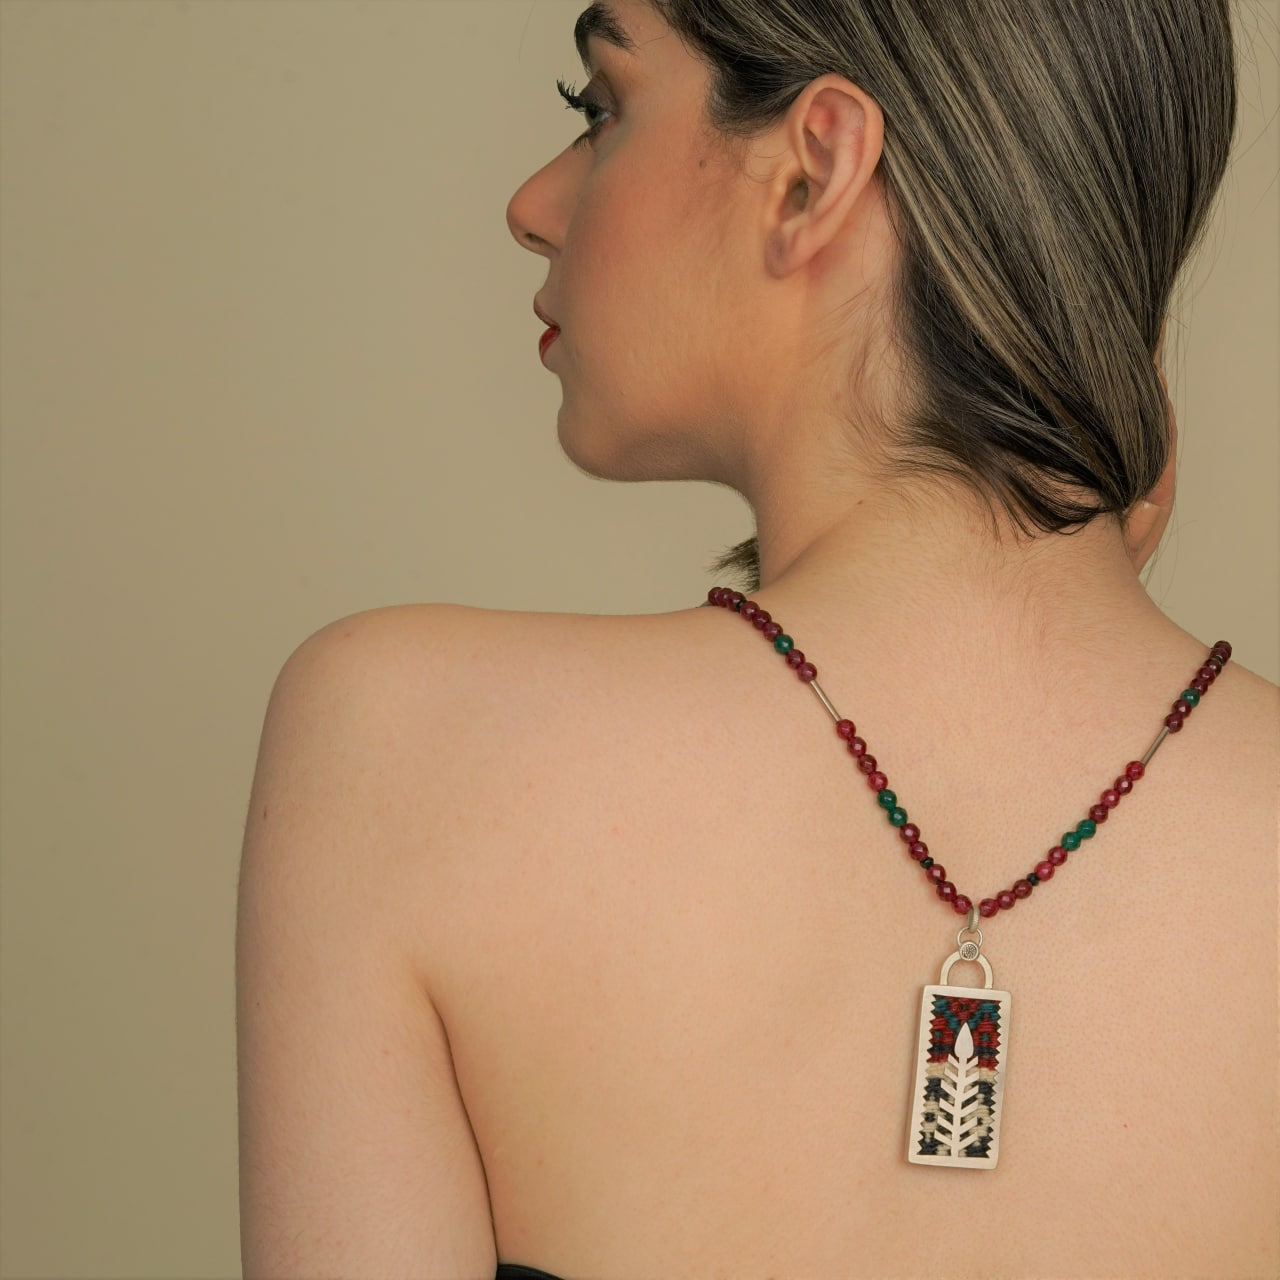 Persian Necklaces Handmade Colorful Silver Necklace Embellished with Kilim:Persian Jewelry-A ART GALLERY